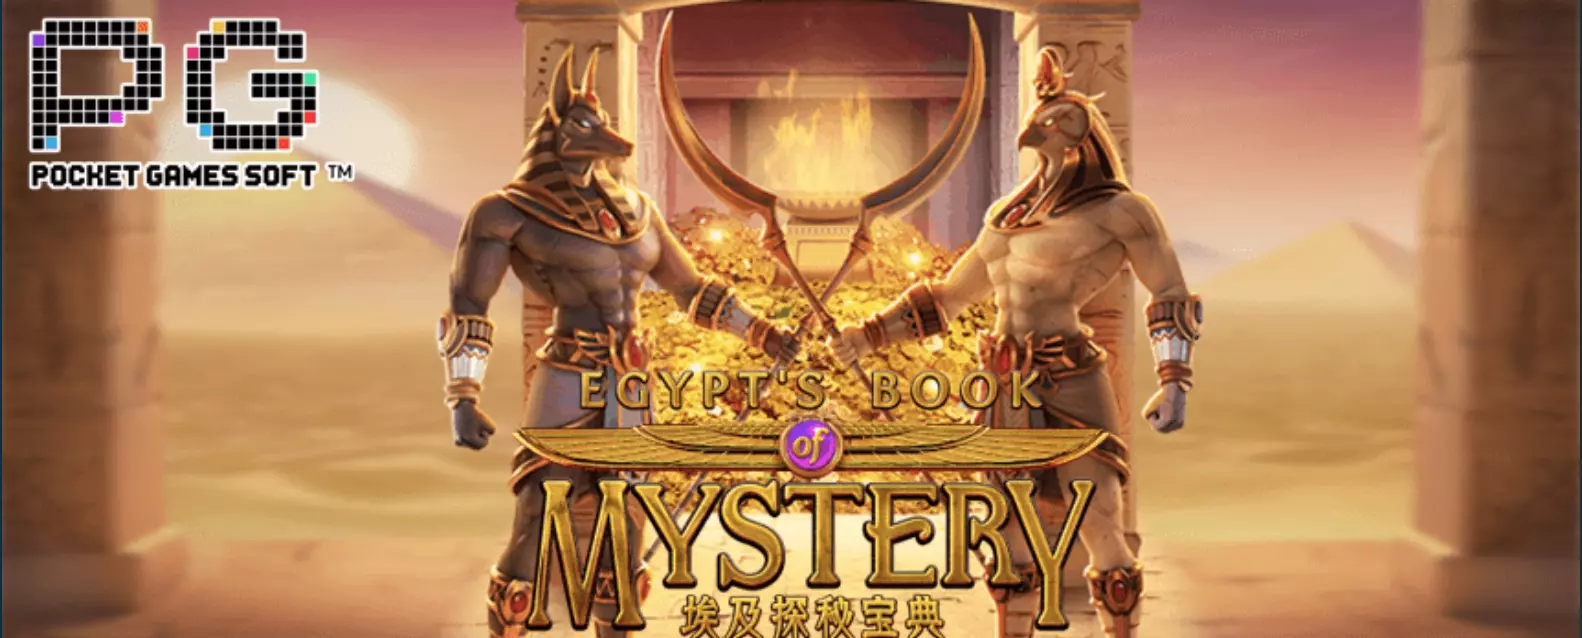 Egypt’s Book Of MYSTERY